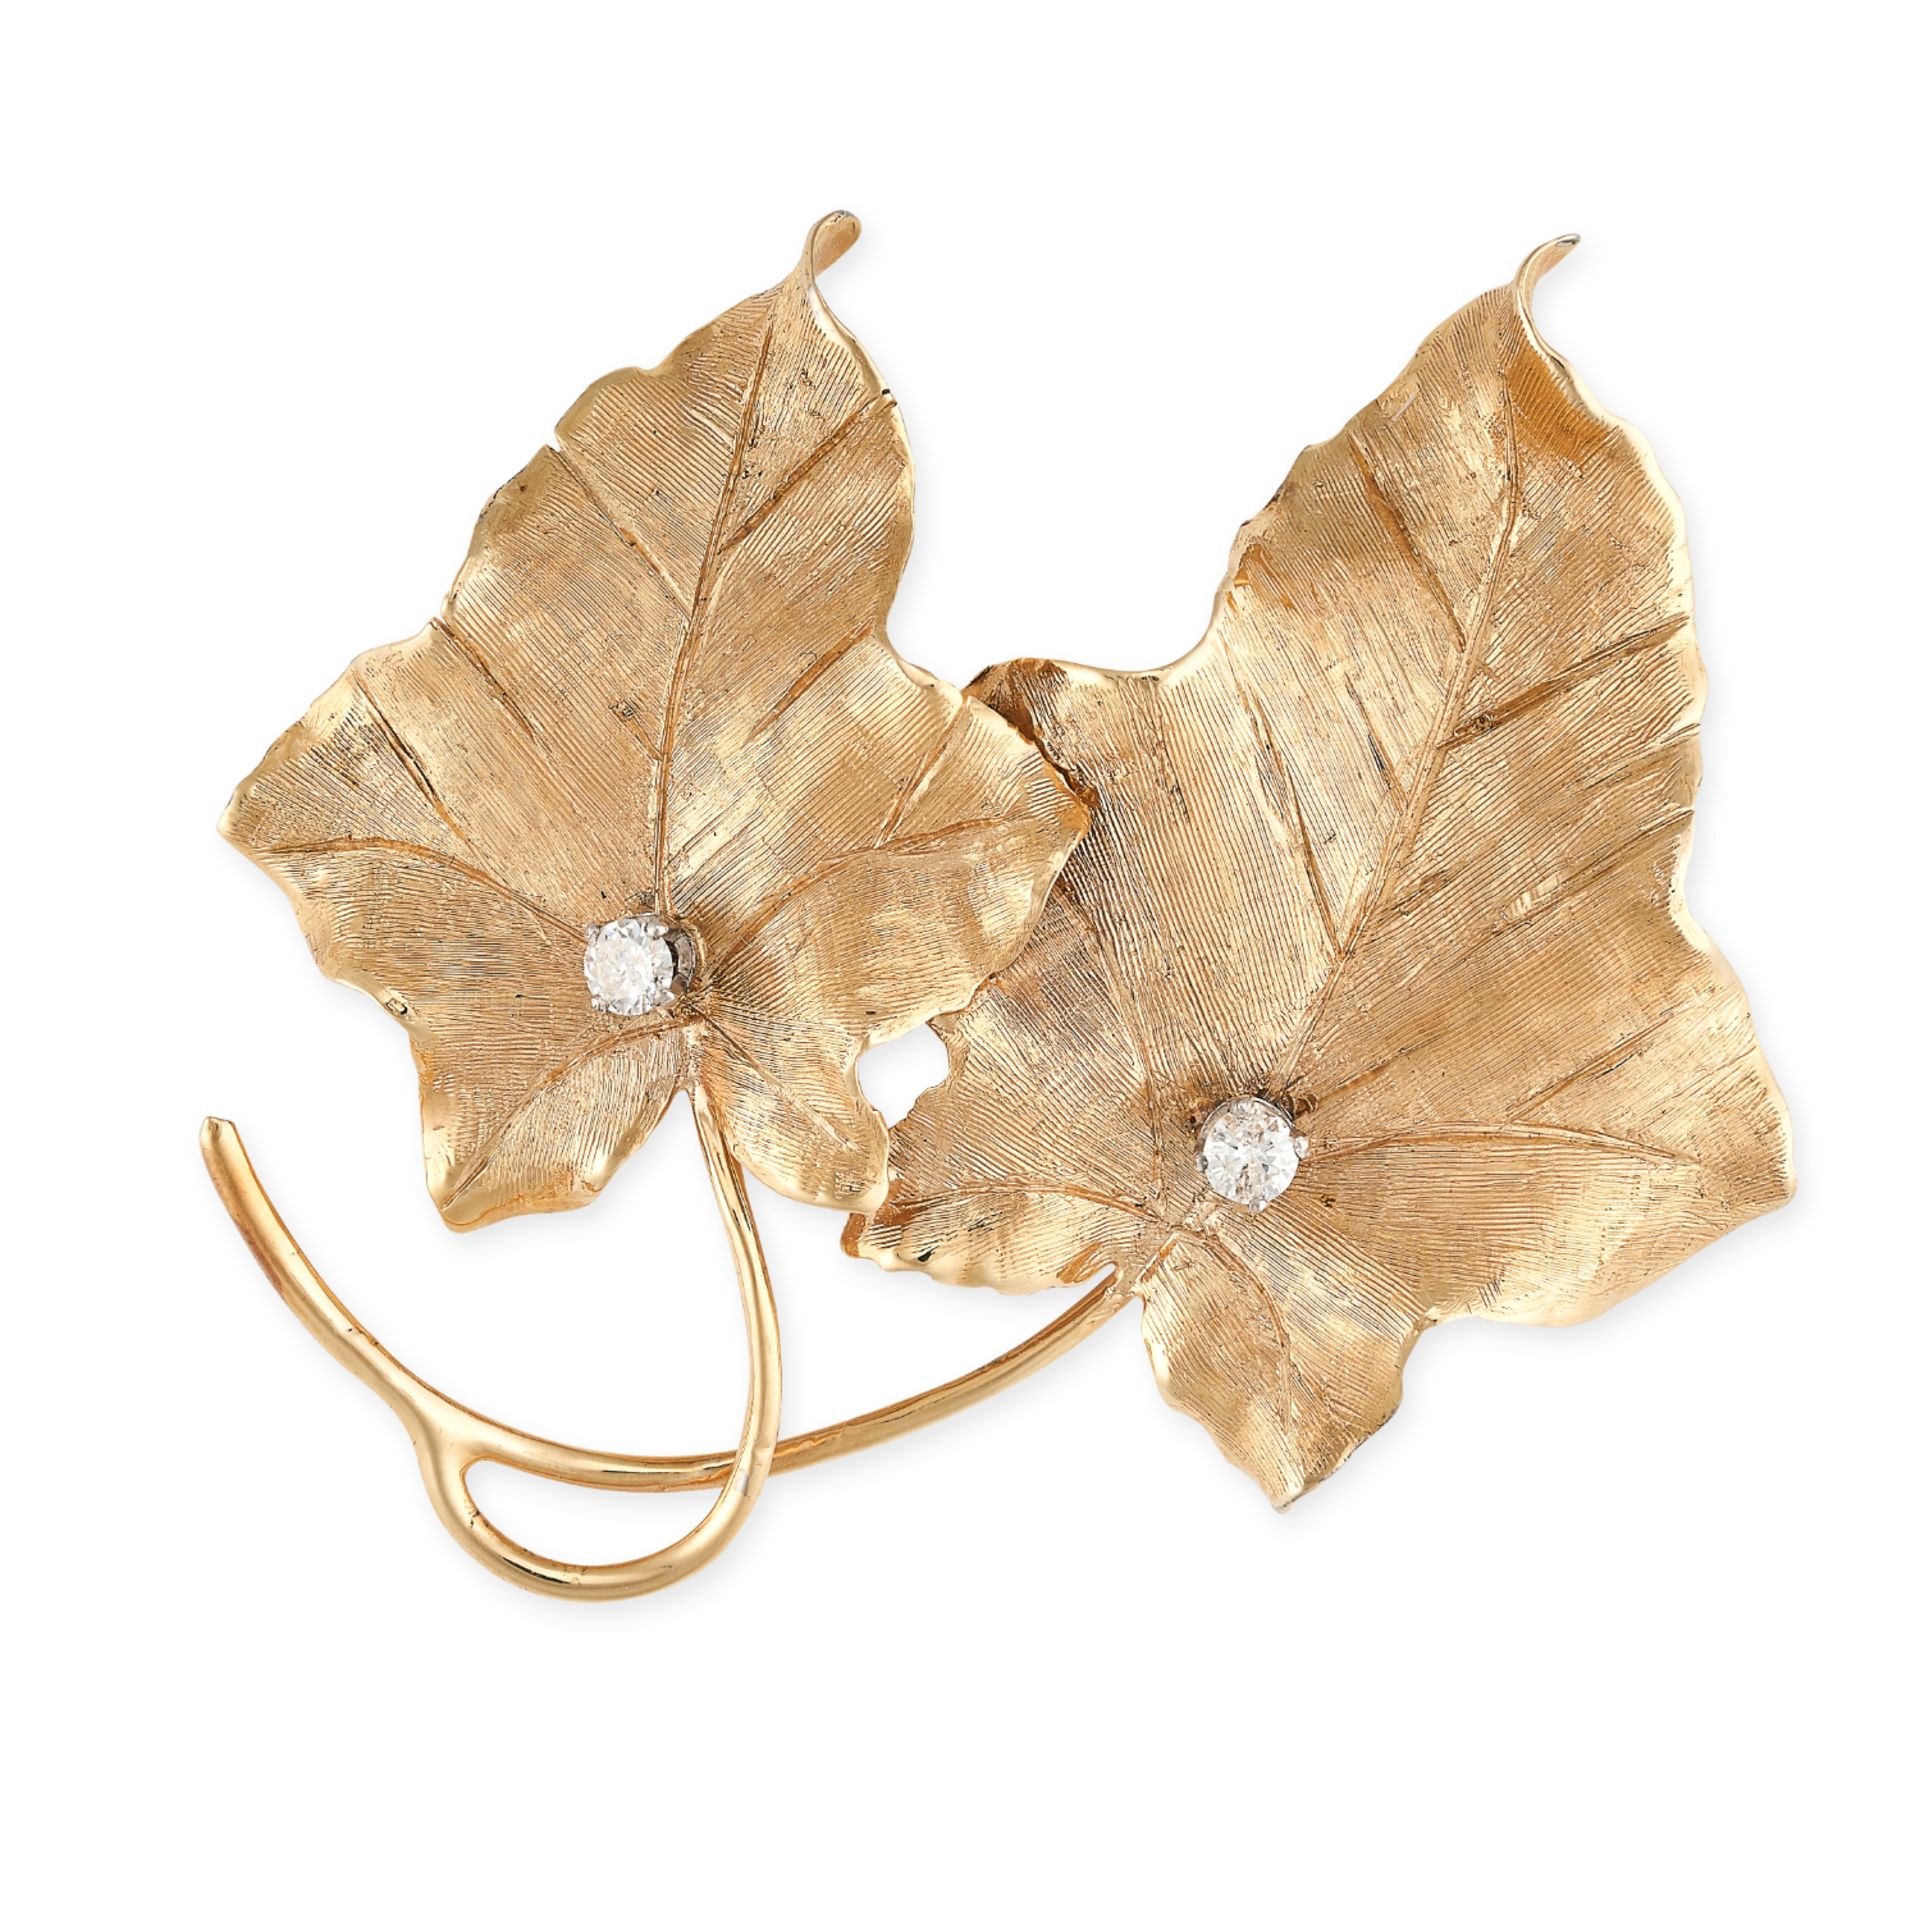 NO RESERVE - A VINTAGE DIAMOND LEAF BROOCH Made in 14 carat yellow gold, designed as two textured